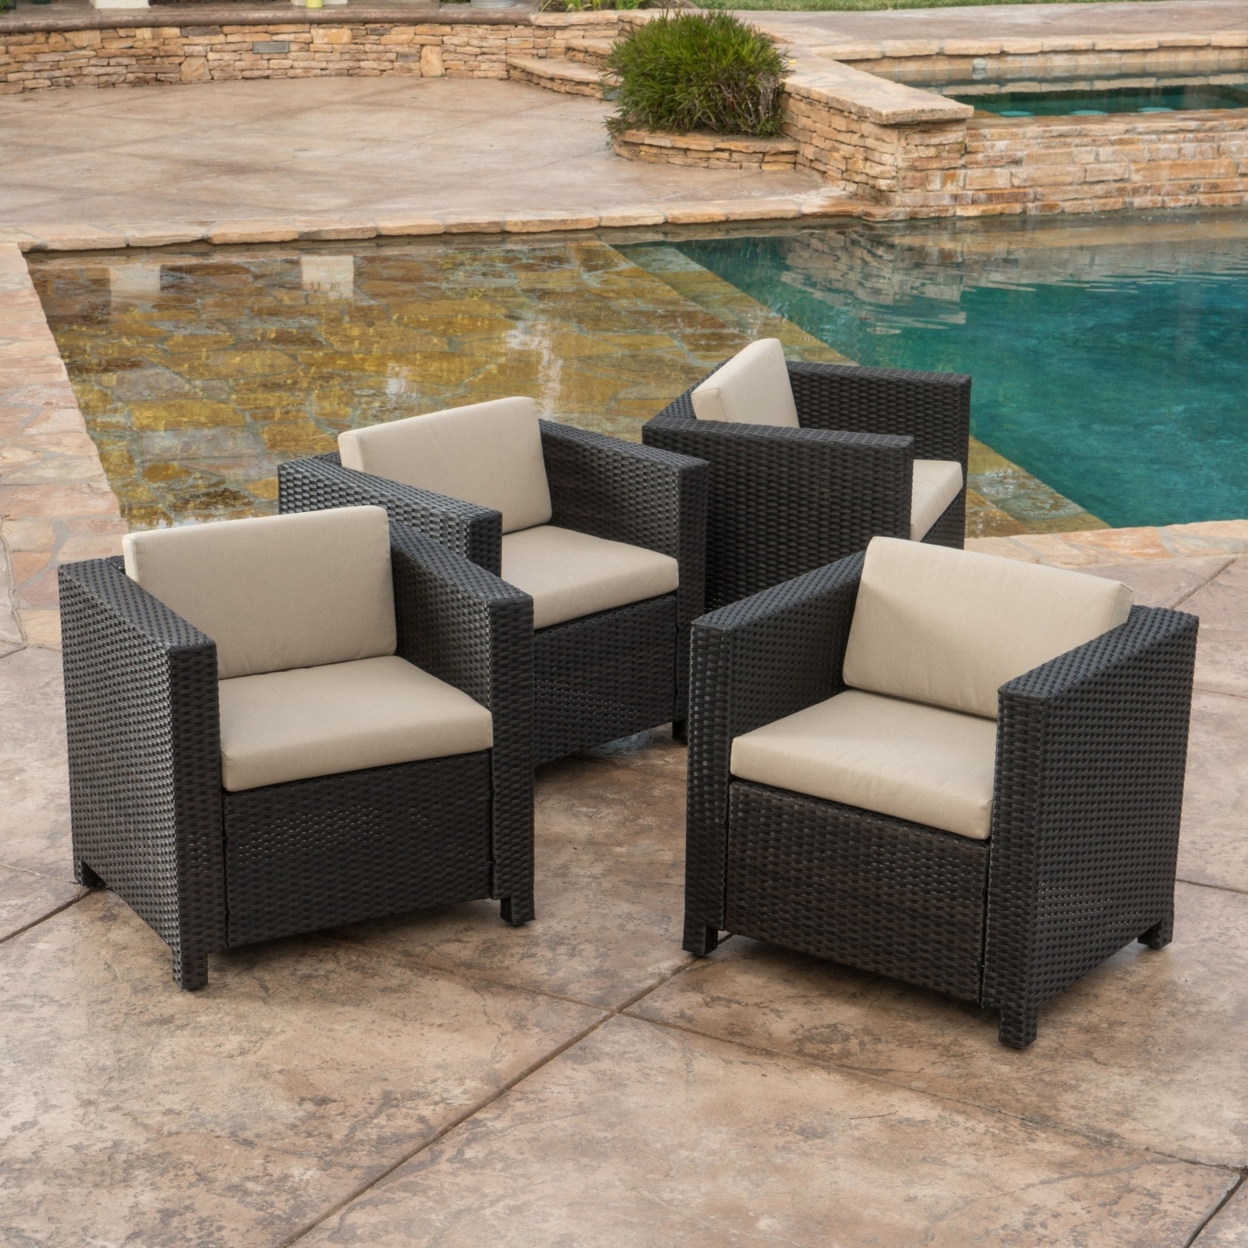 Bowden Outdoor Brown Wicker Club Chairs With Cushions (set Of 4) - Black/Gray Wicker